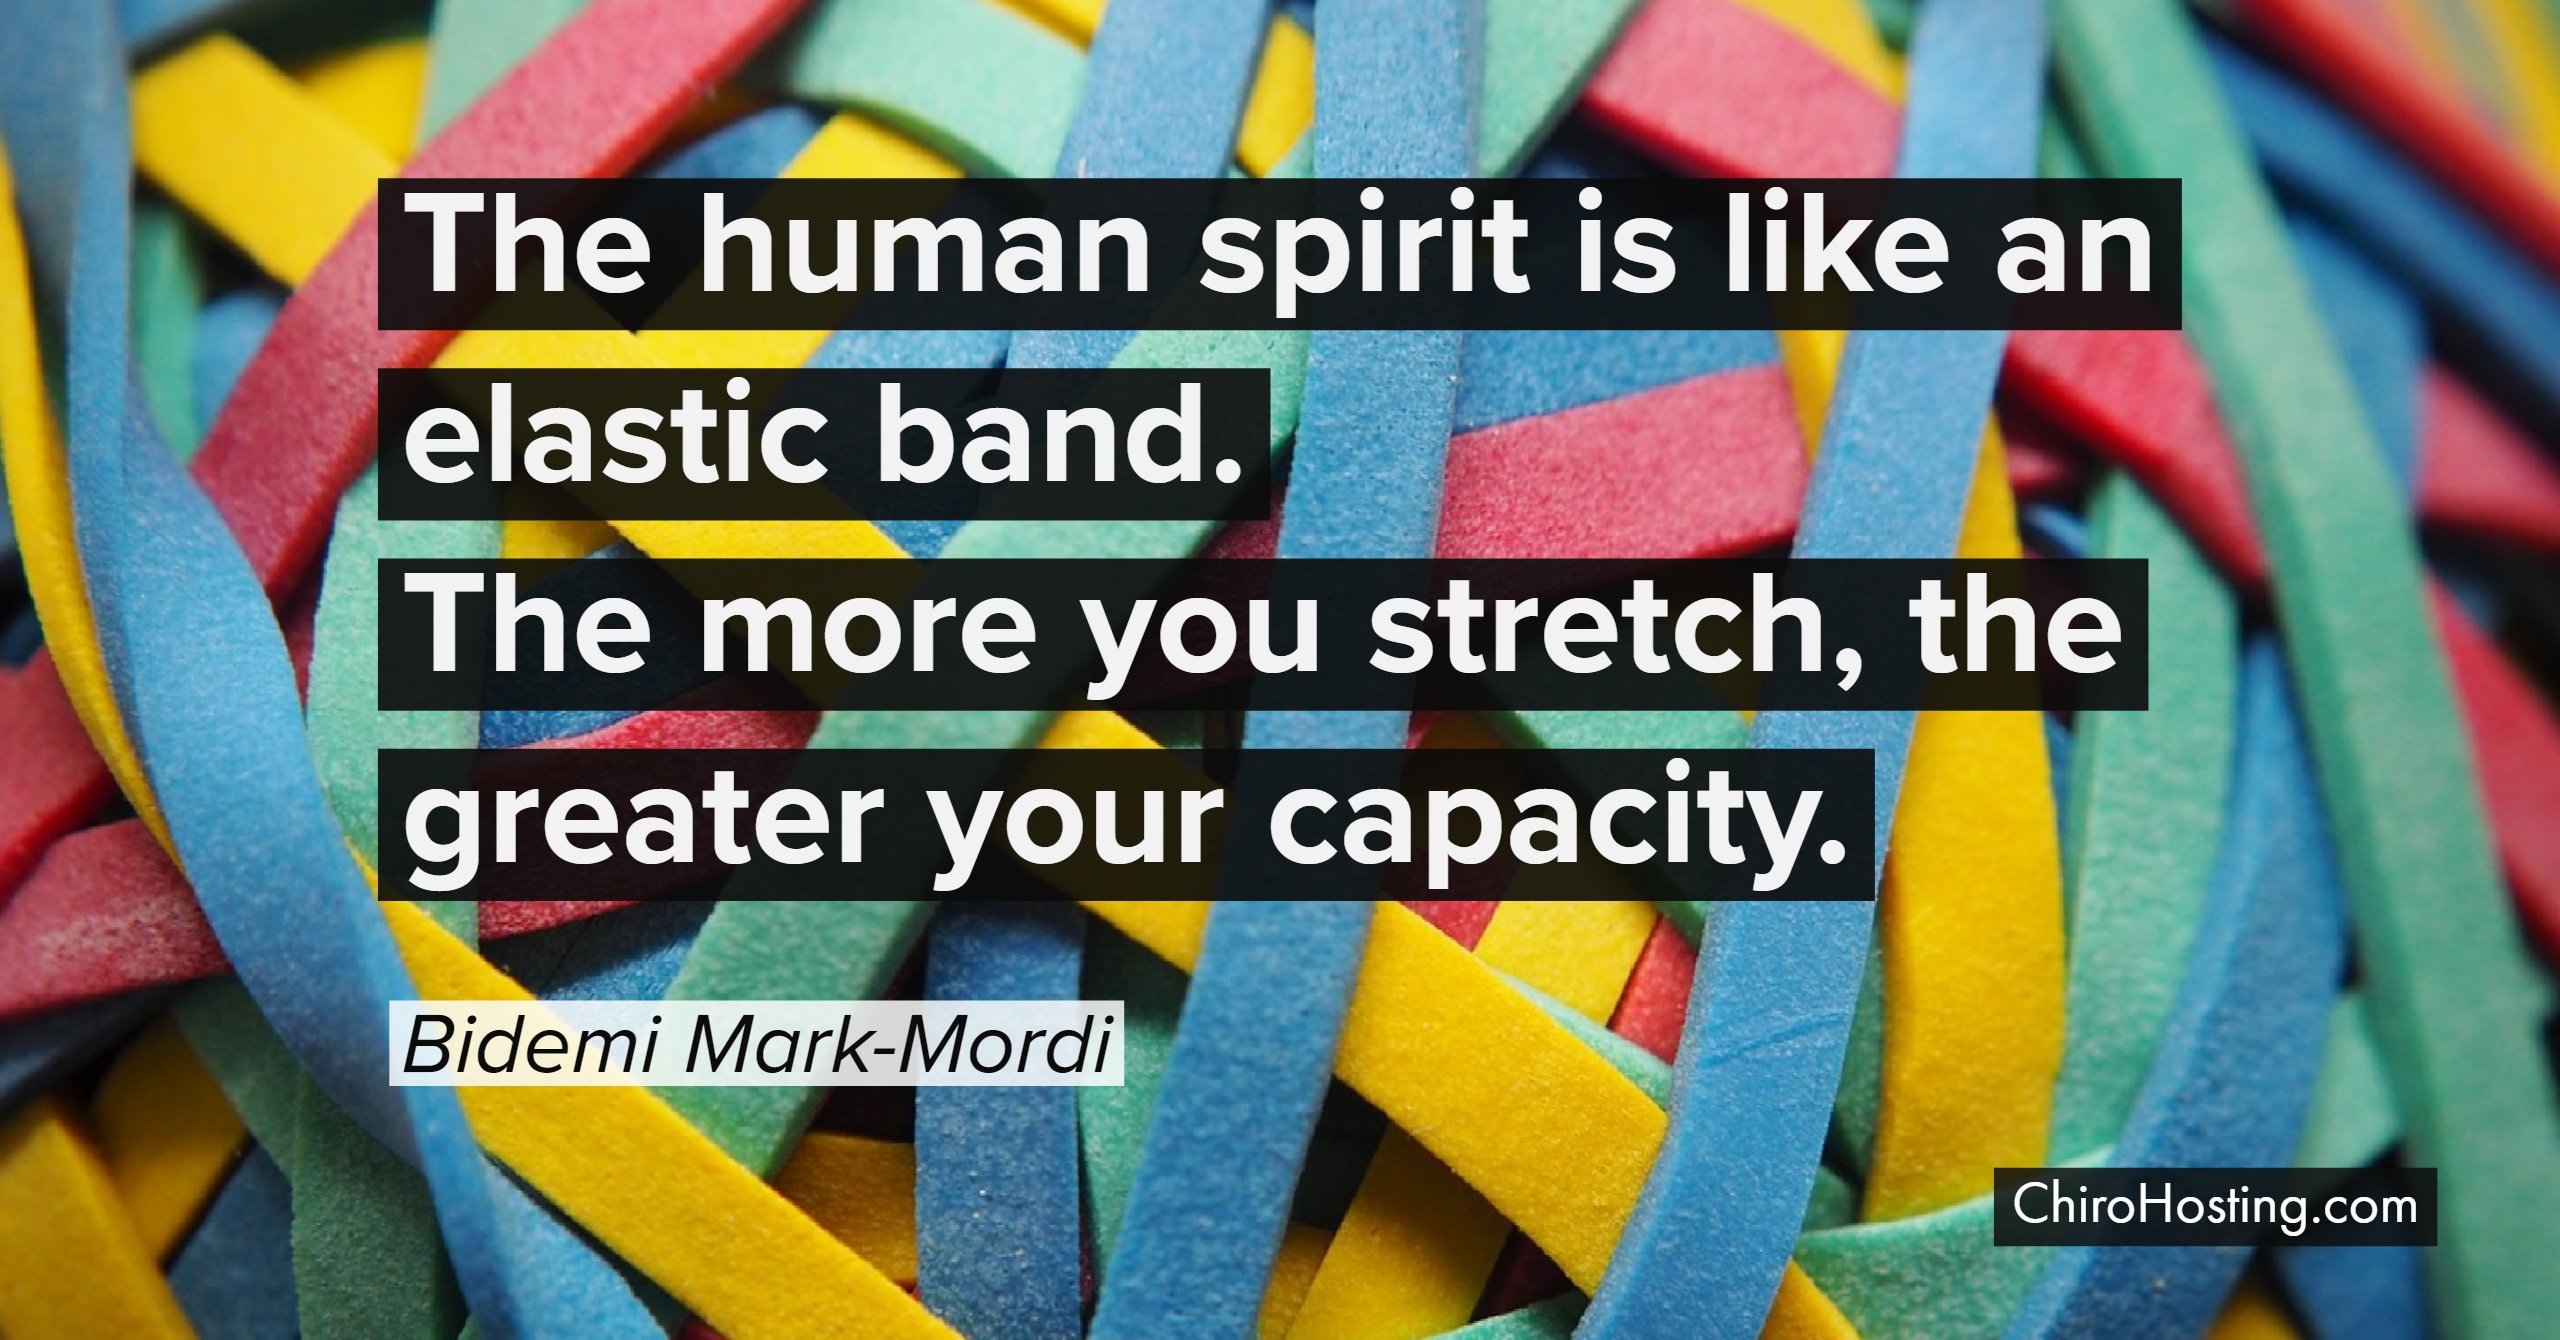 The human spirit is like an elastic band. The more you stretch, the greater your capacity.